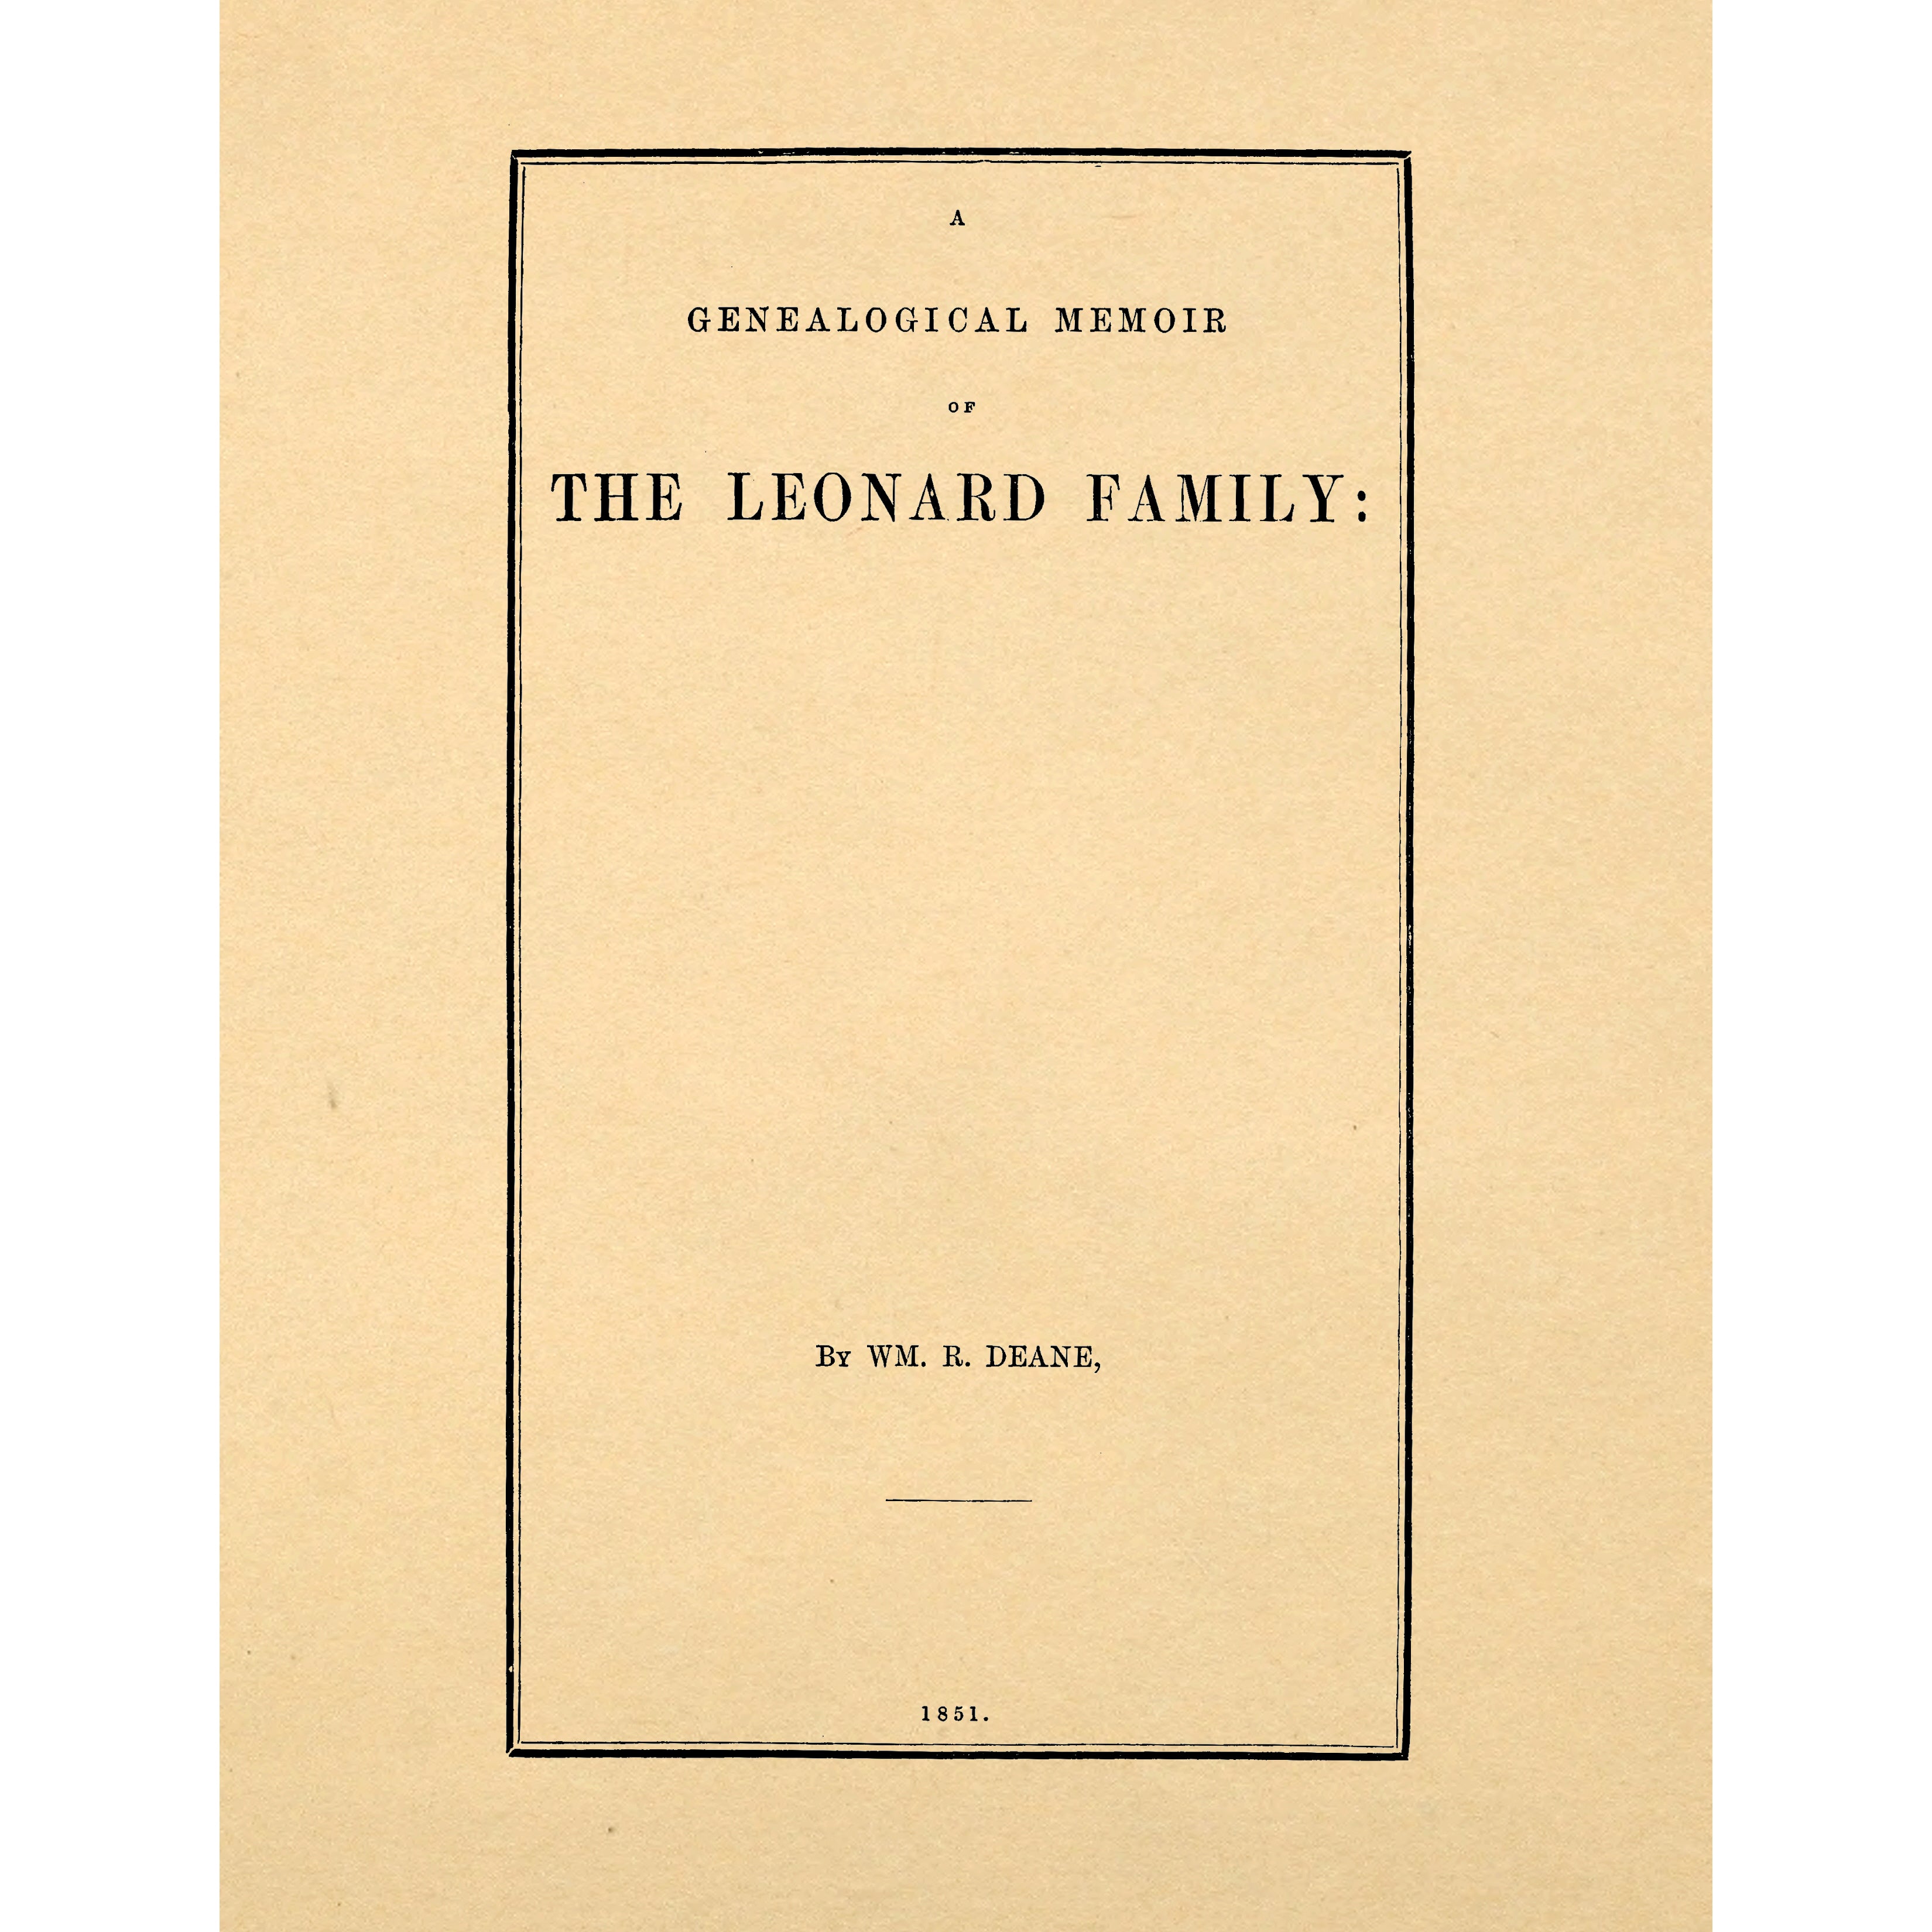 A genealogical memoir of the Leonard family : containing a full account of the first three generations of the family of James Leonard,